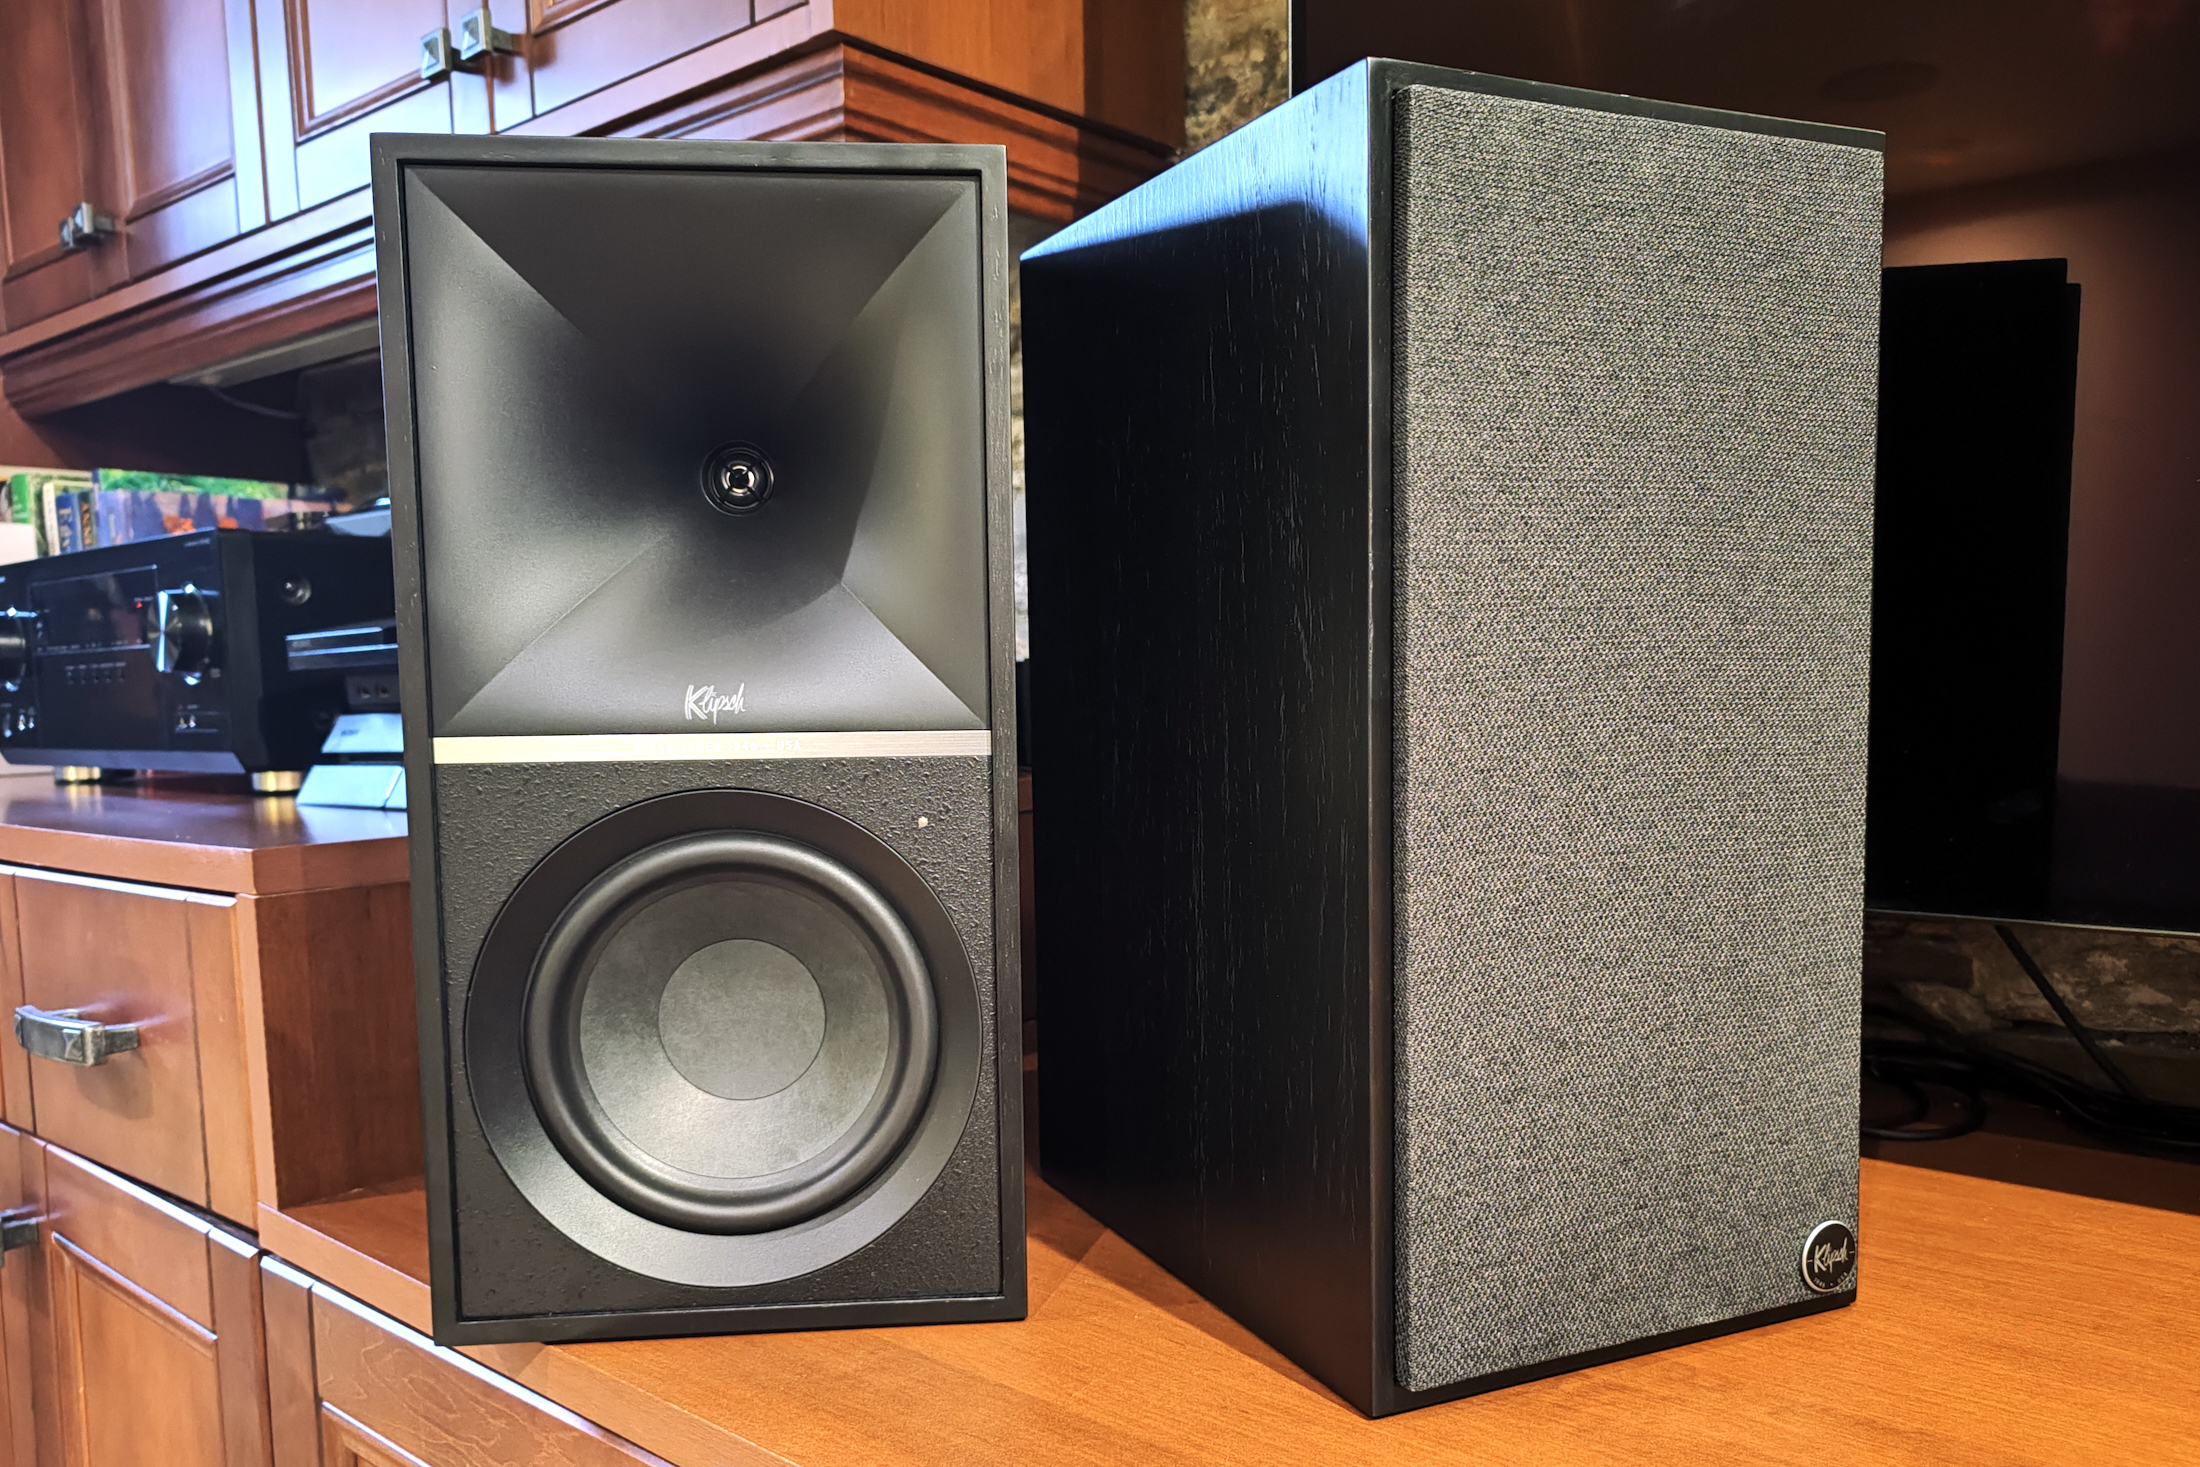 Why are Speakers and Sound Systems so expensive?